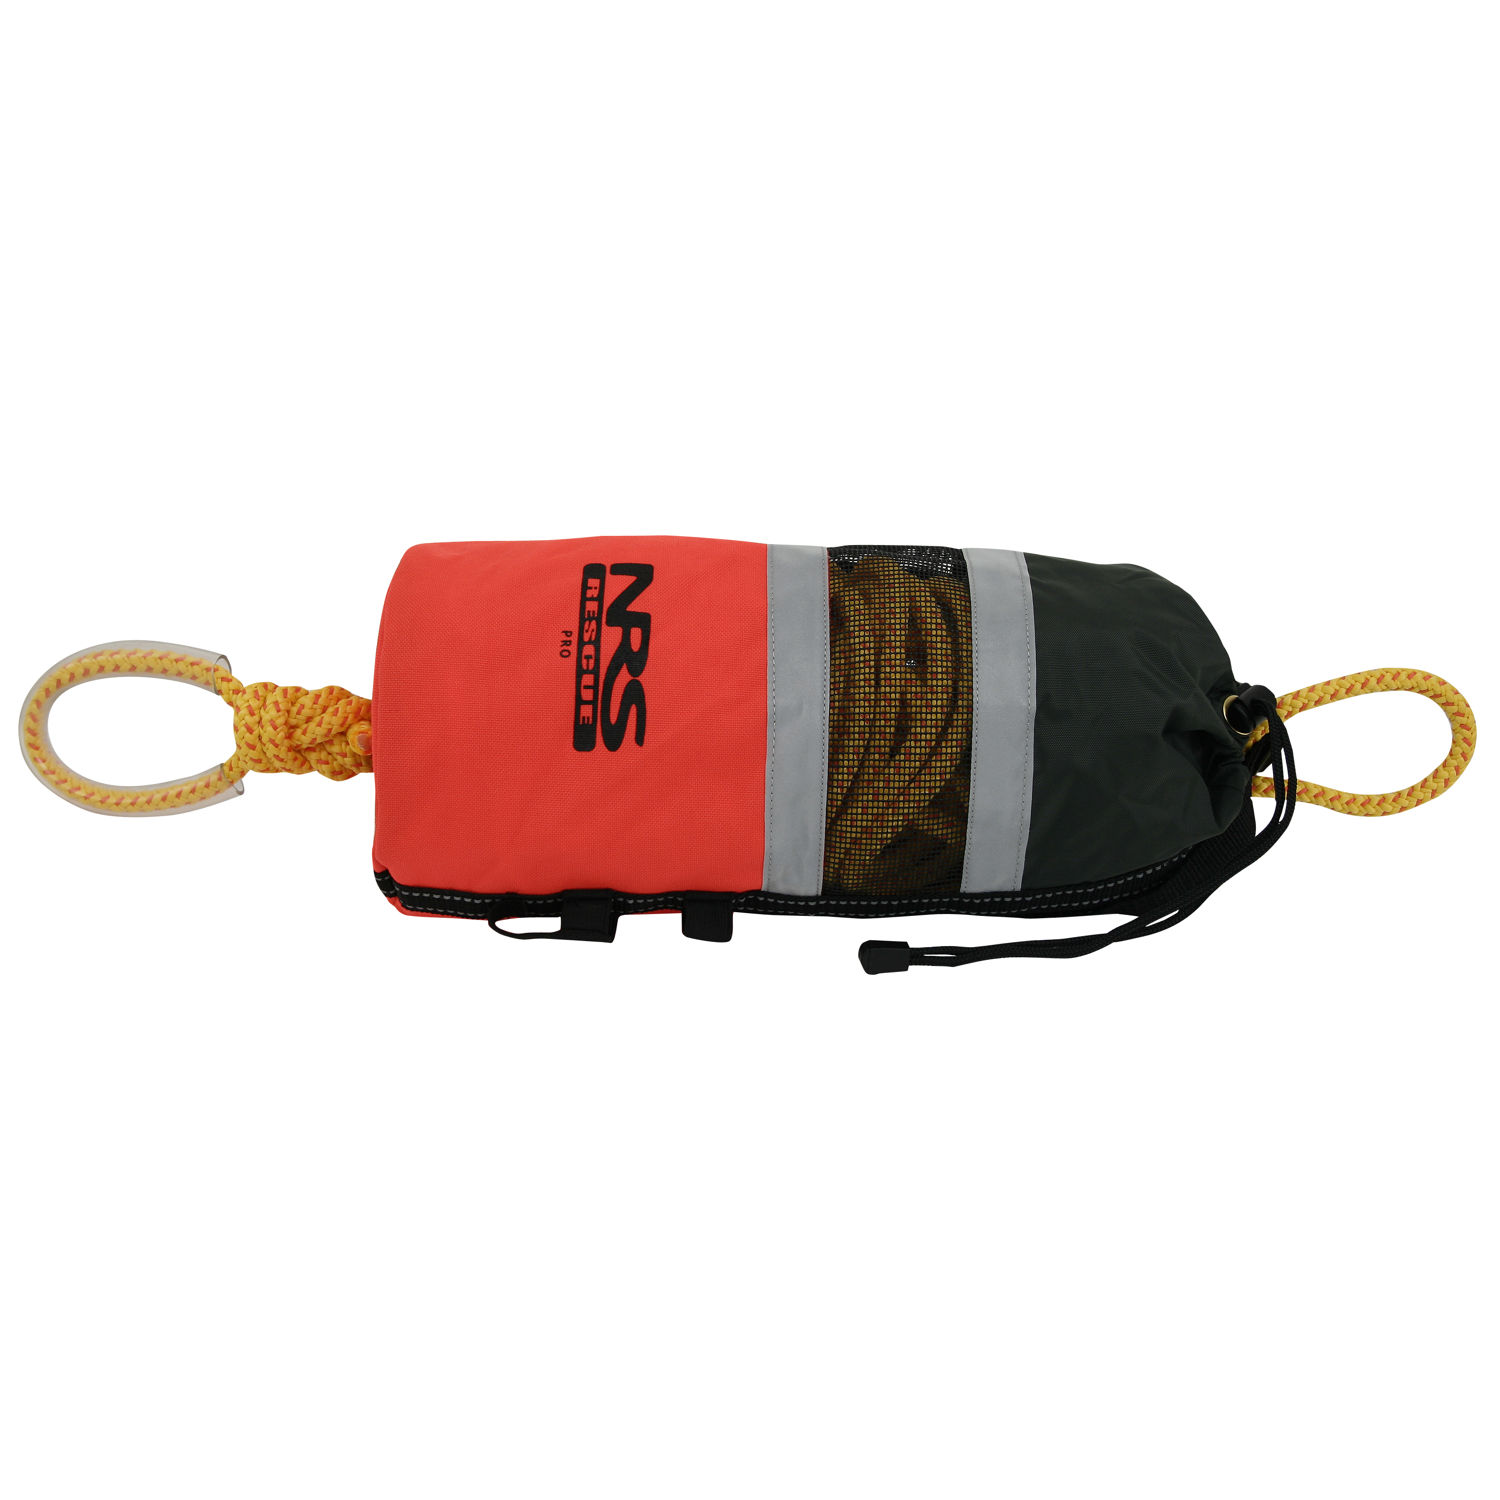 Mustang Survival Corp 75 Rope Throw Bag PRO